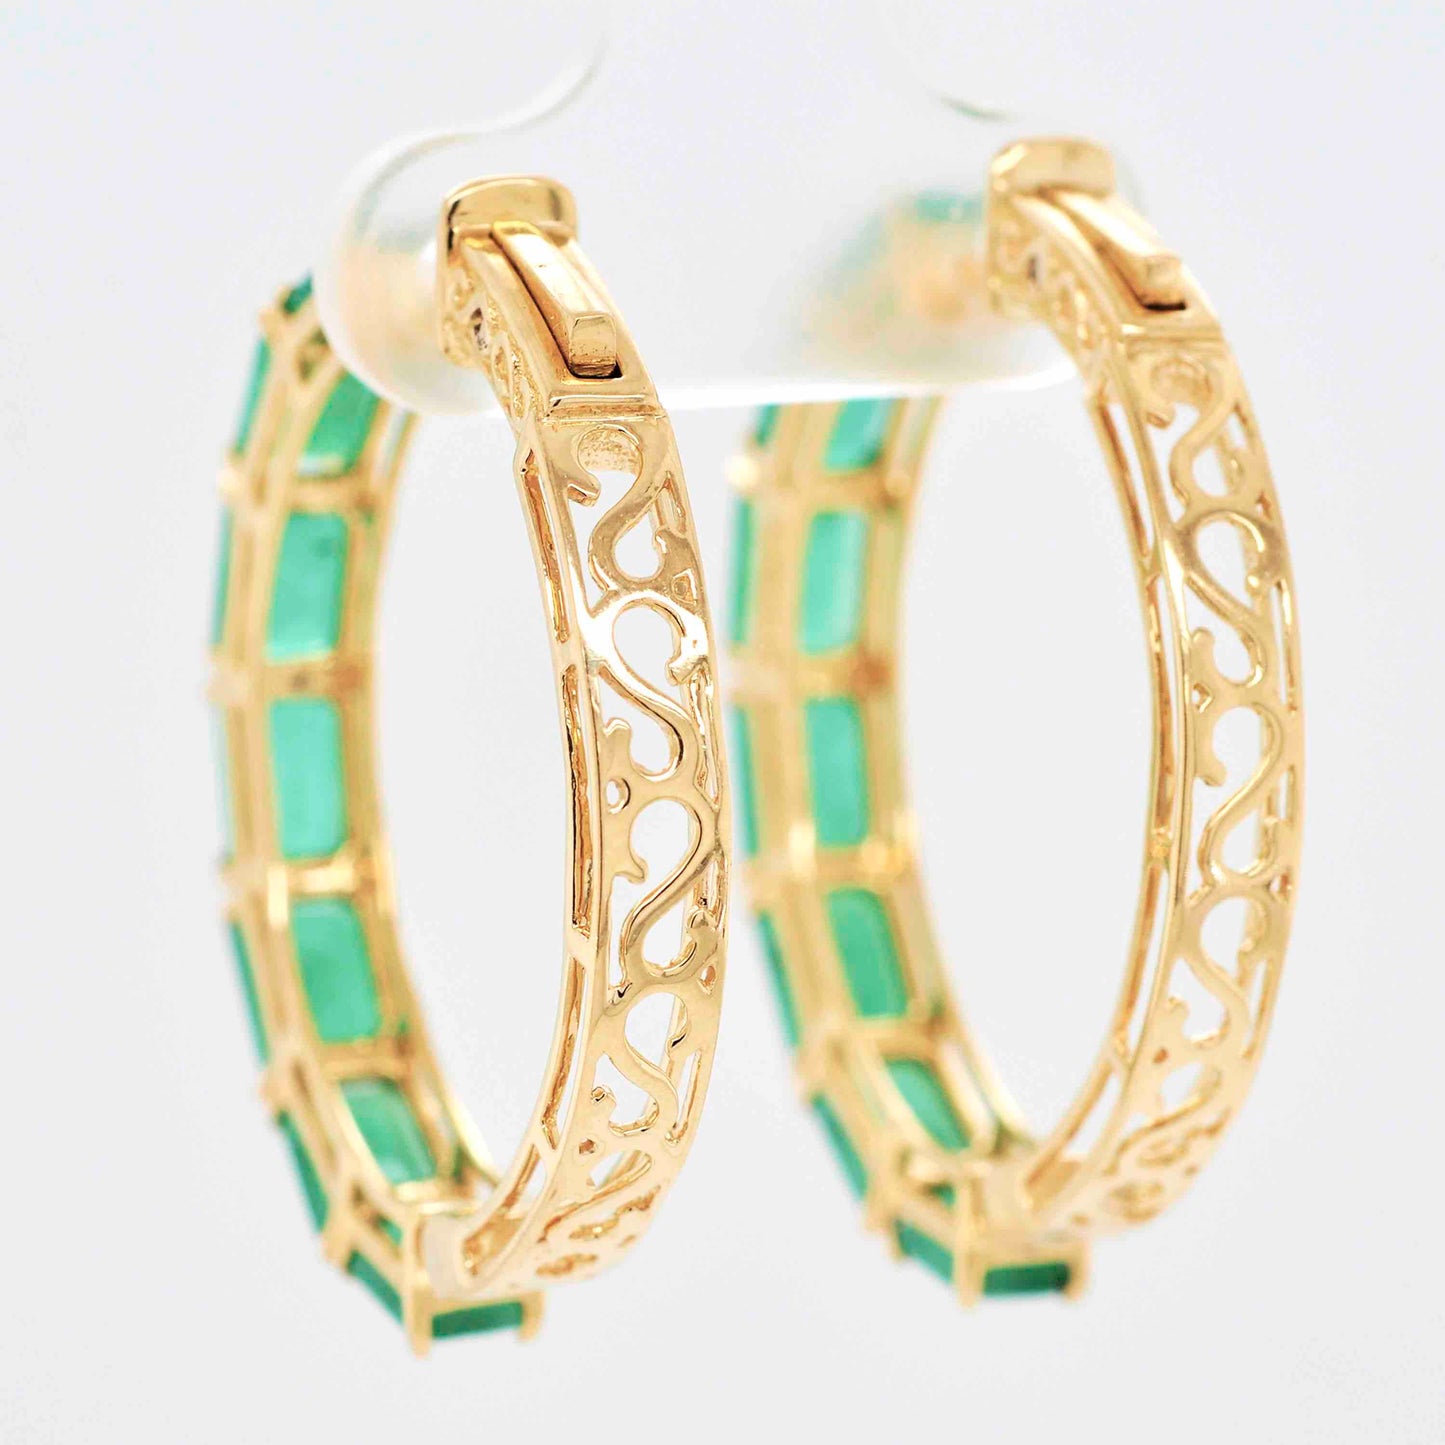 Handcrafted gold hoops with genuine emerald gemstones